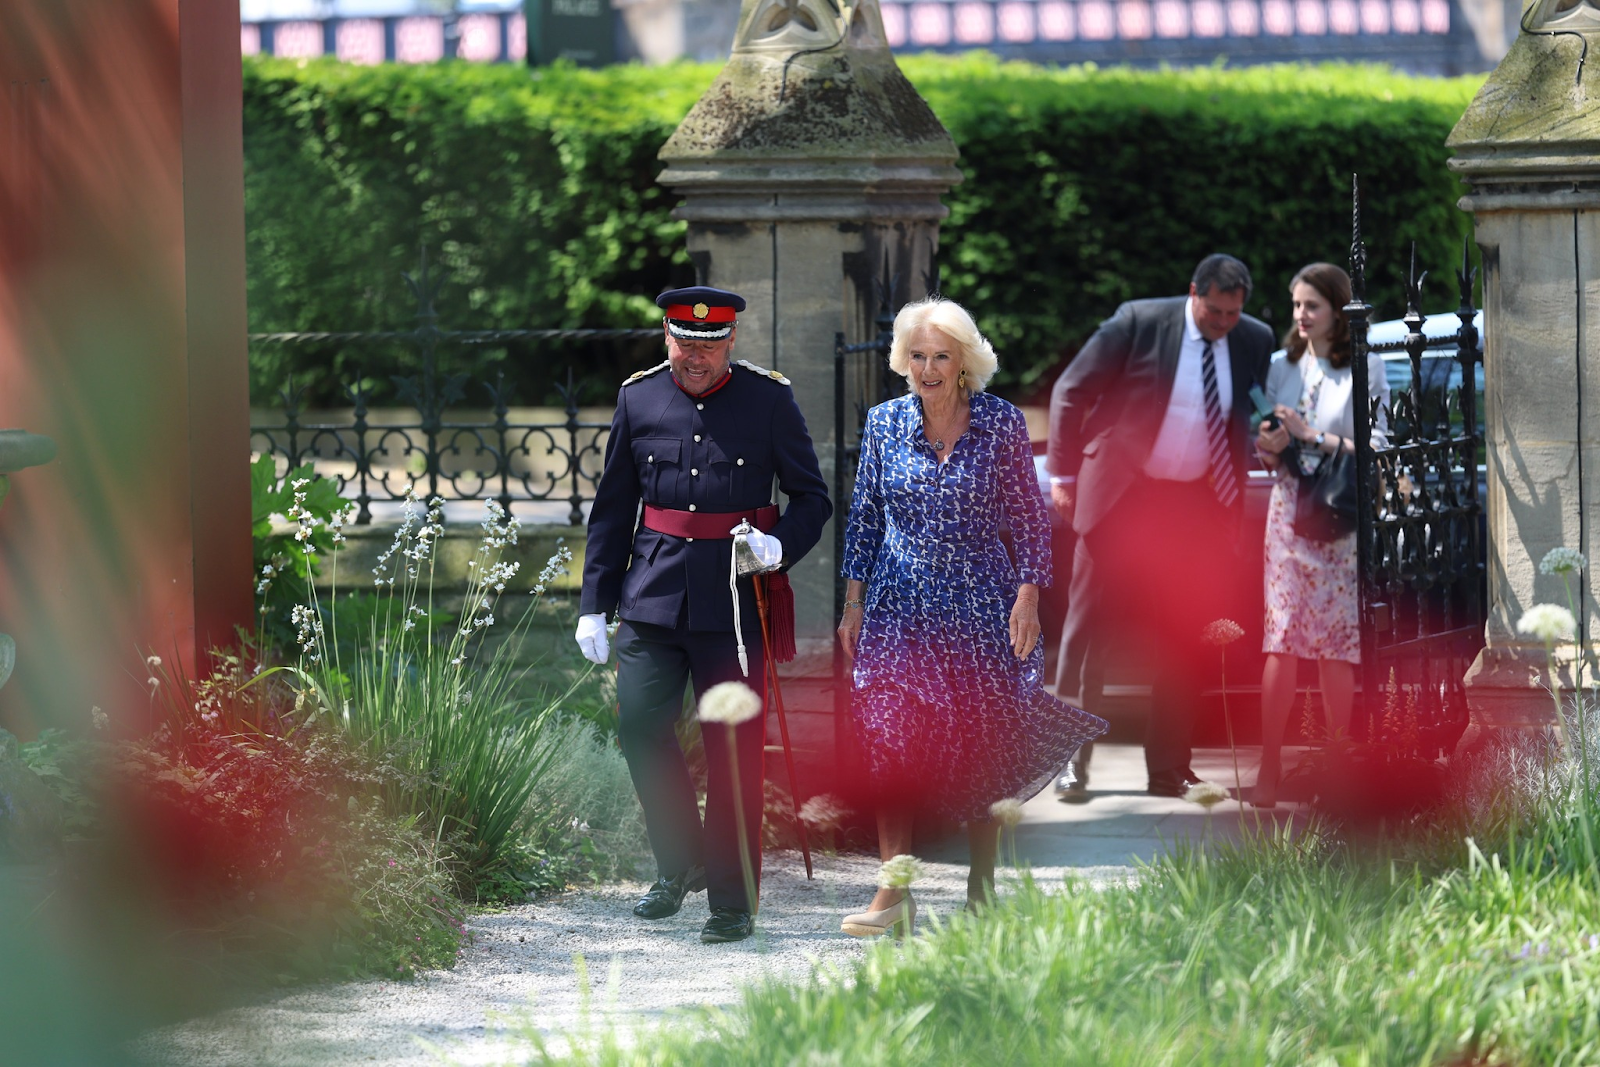 Her Majesty arriving at the Garden Museum with the Representative Deputy Lieutenant for Lambeth